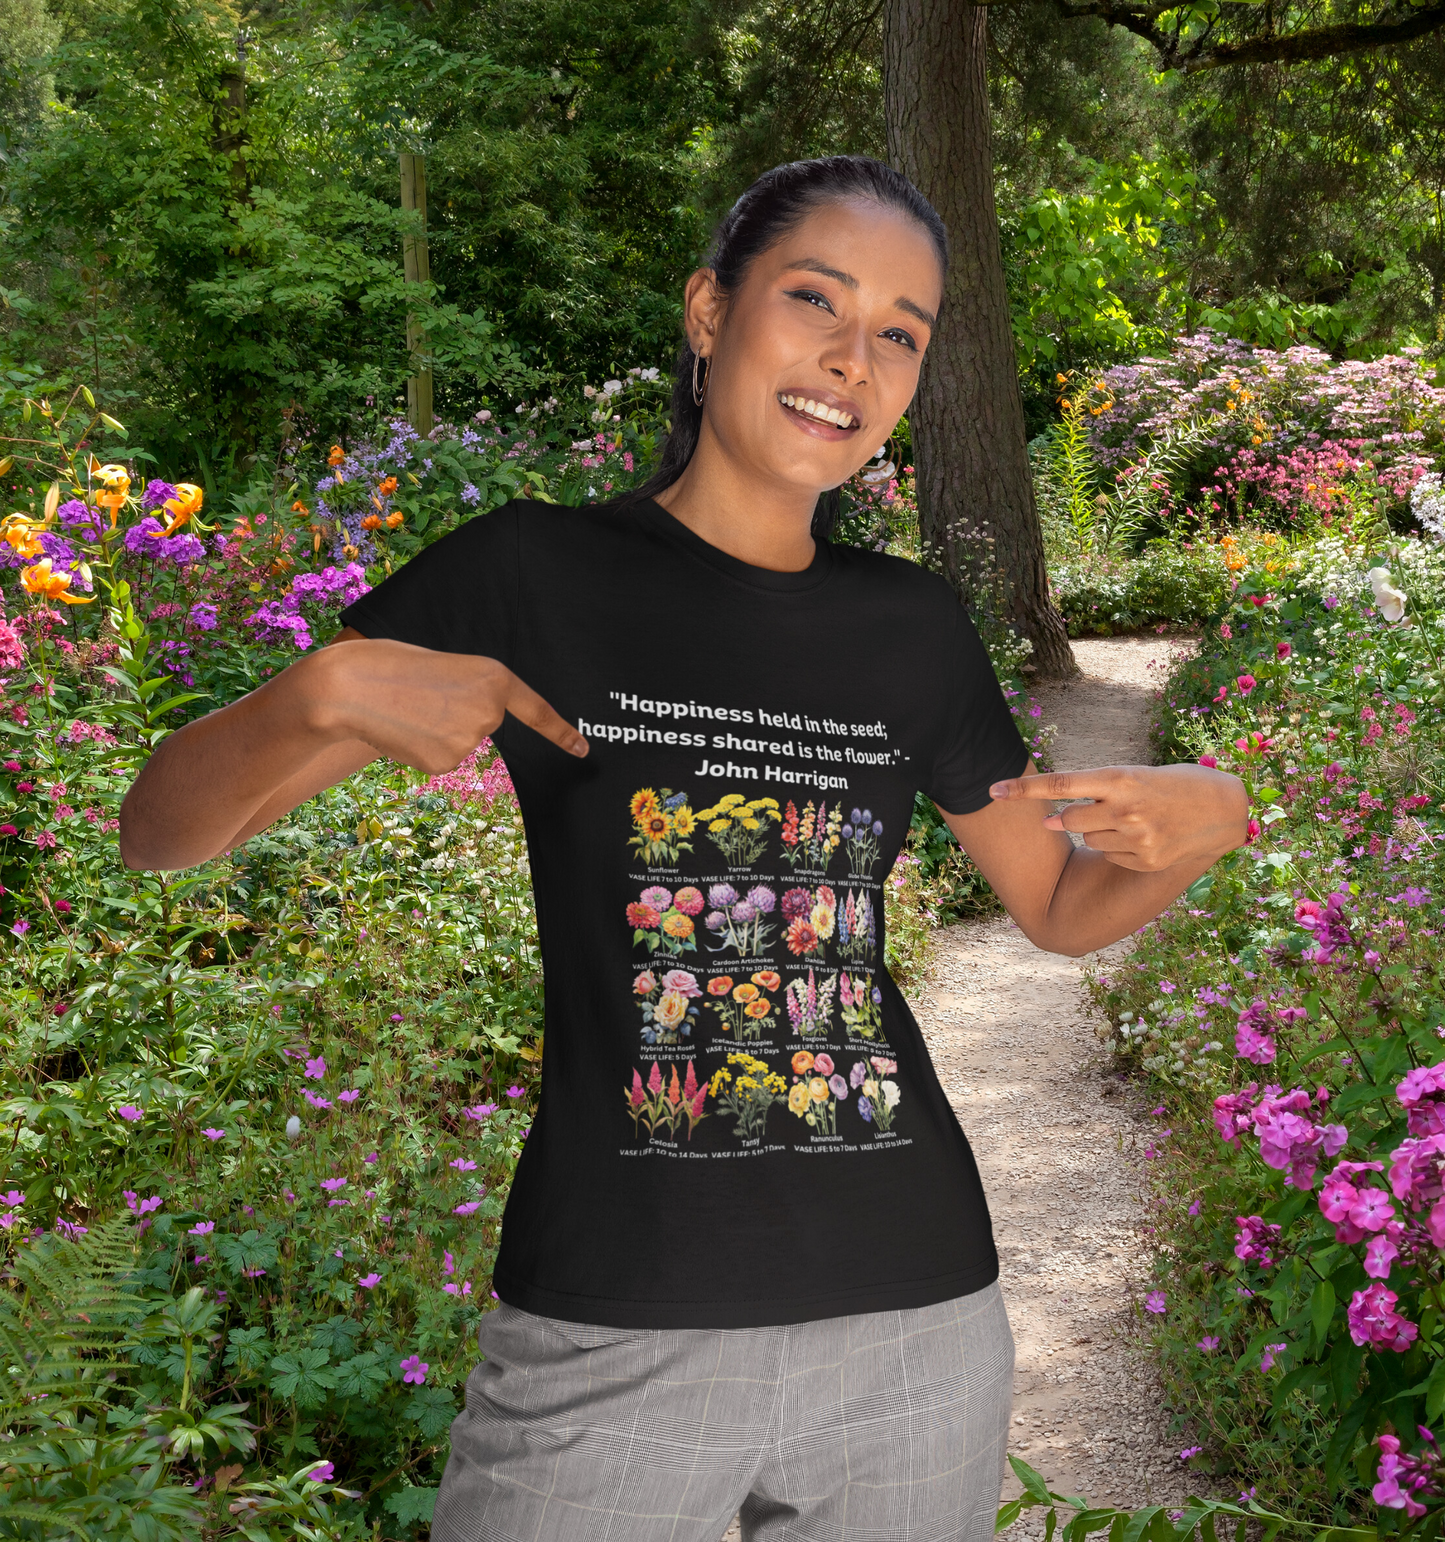 "Floral Whispers" Happiness held in the seed - Women's fitted eco tee